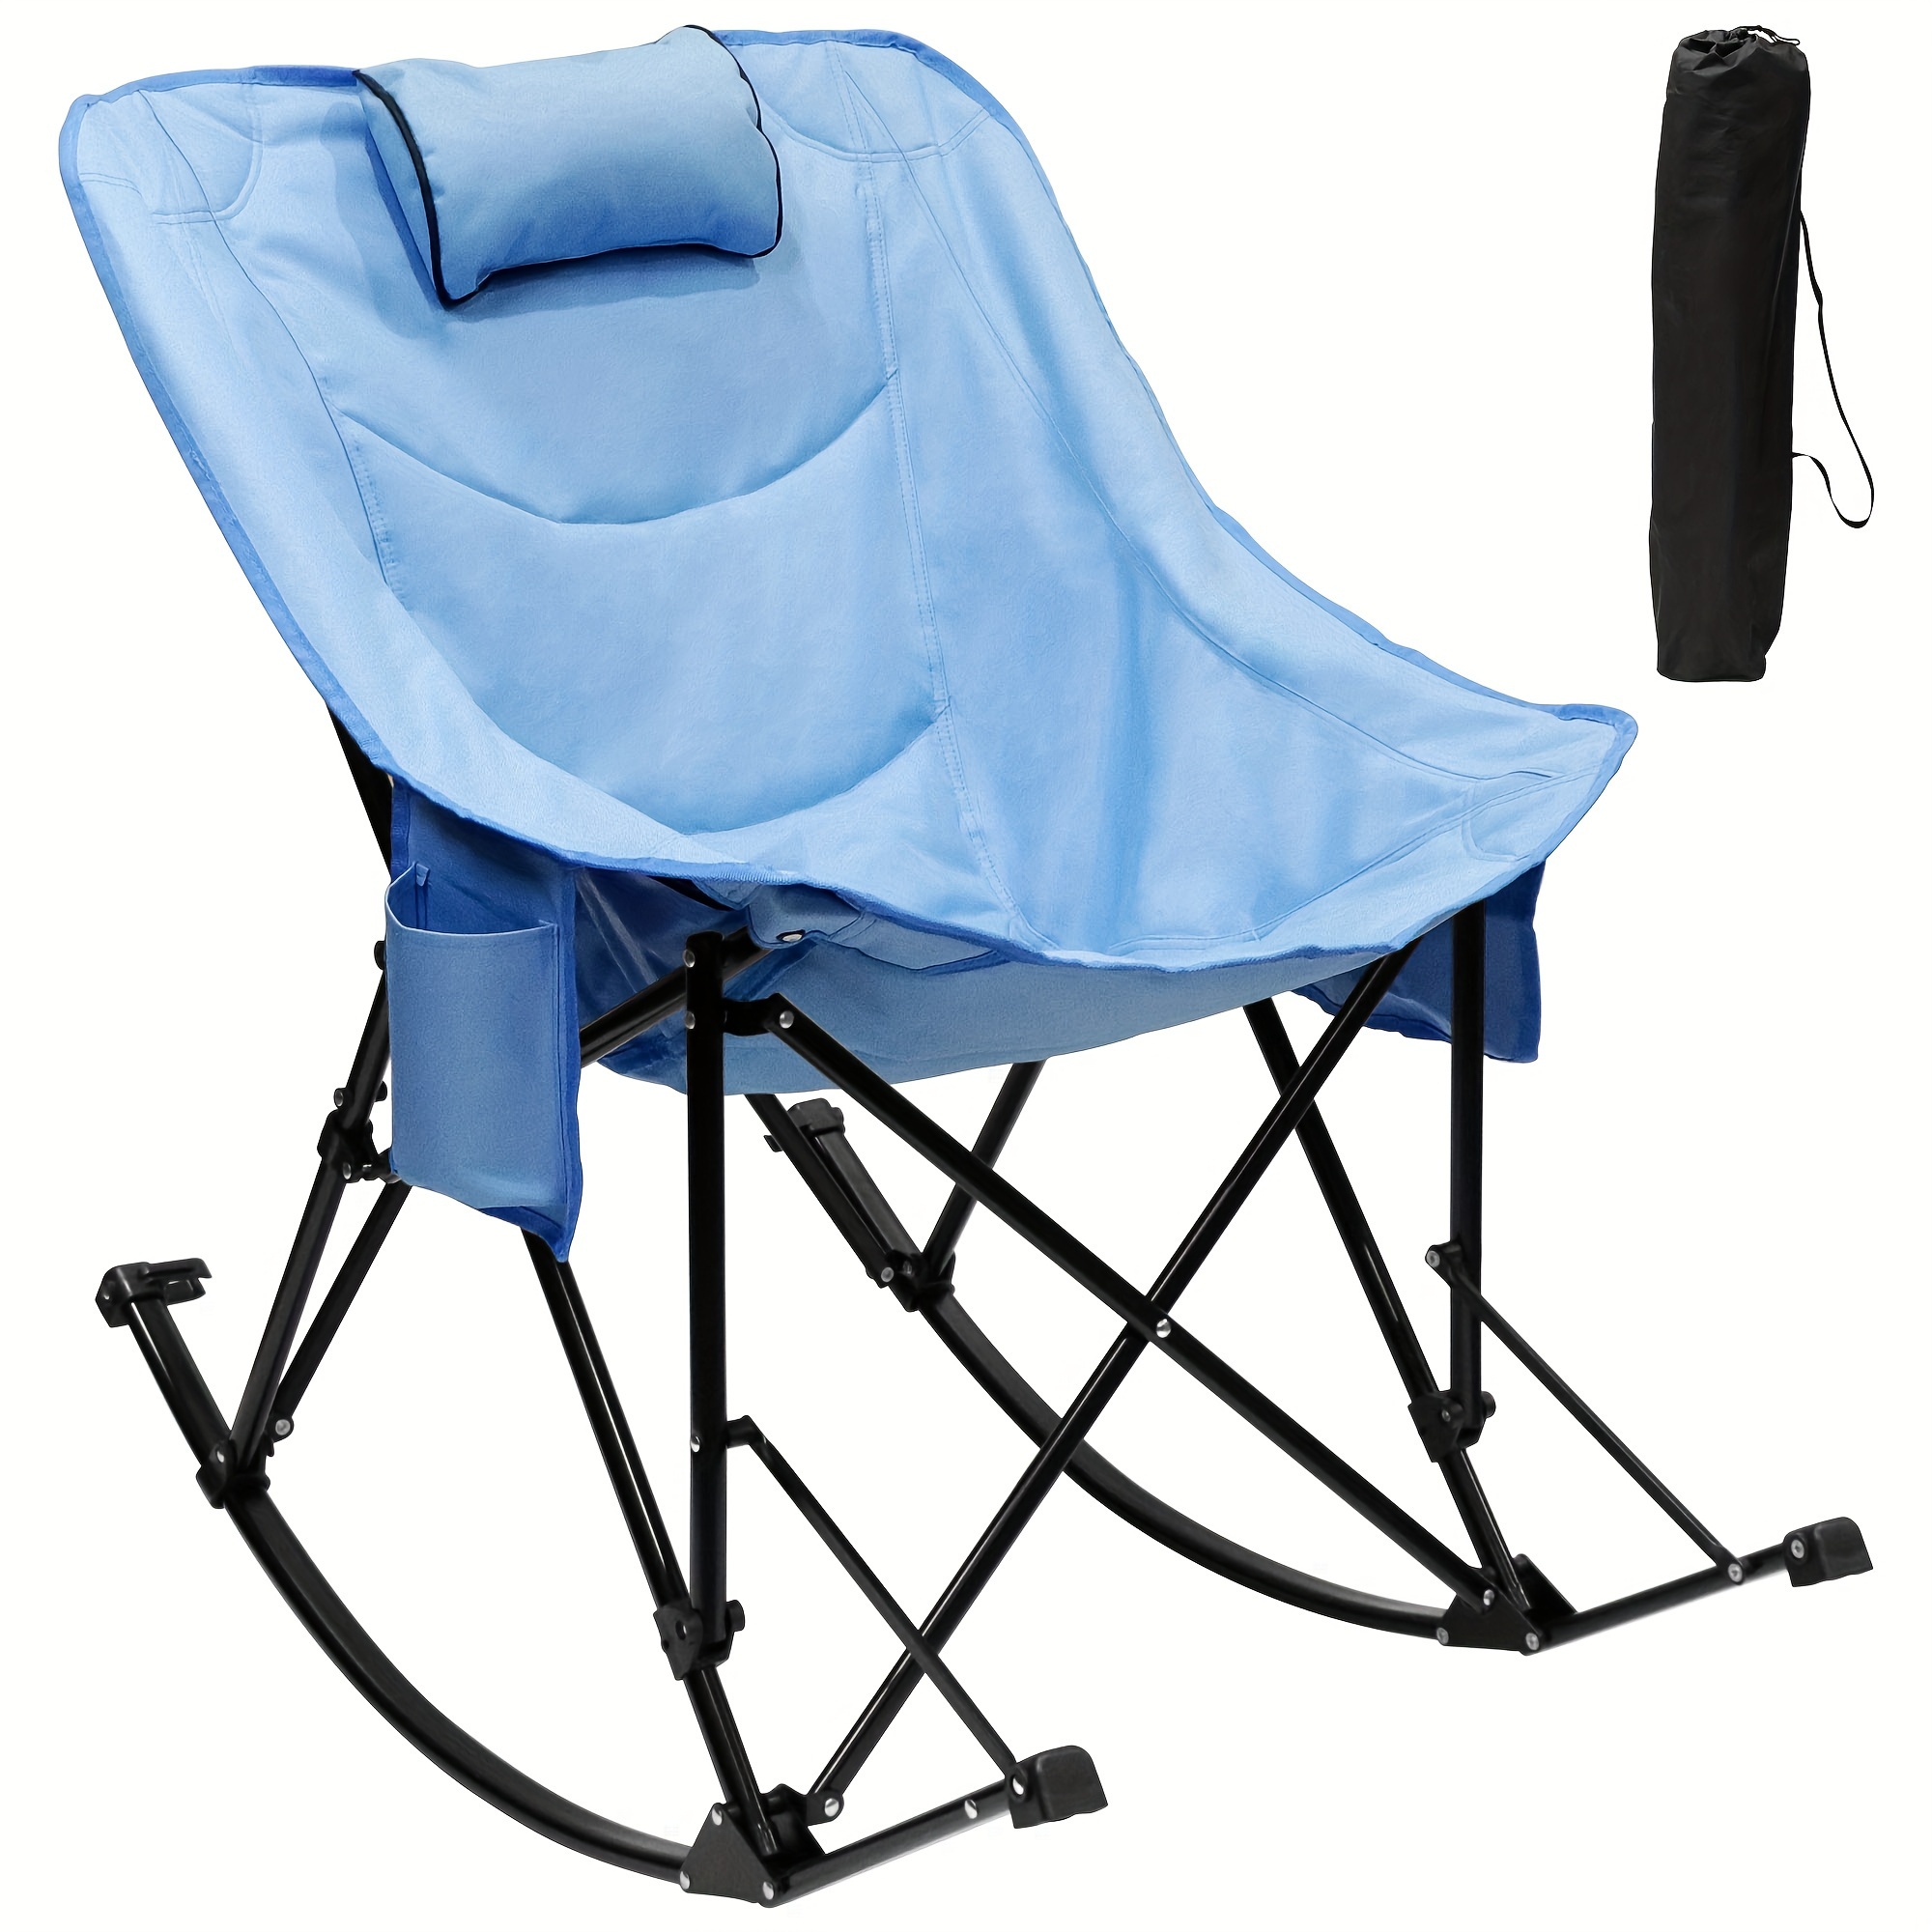 Buy fishing chair Online in Angola at Low Prices at desertcart